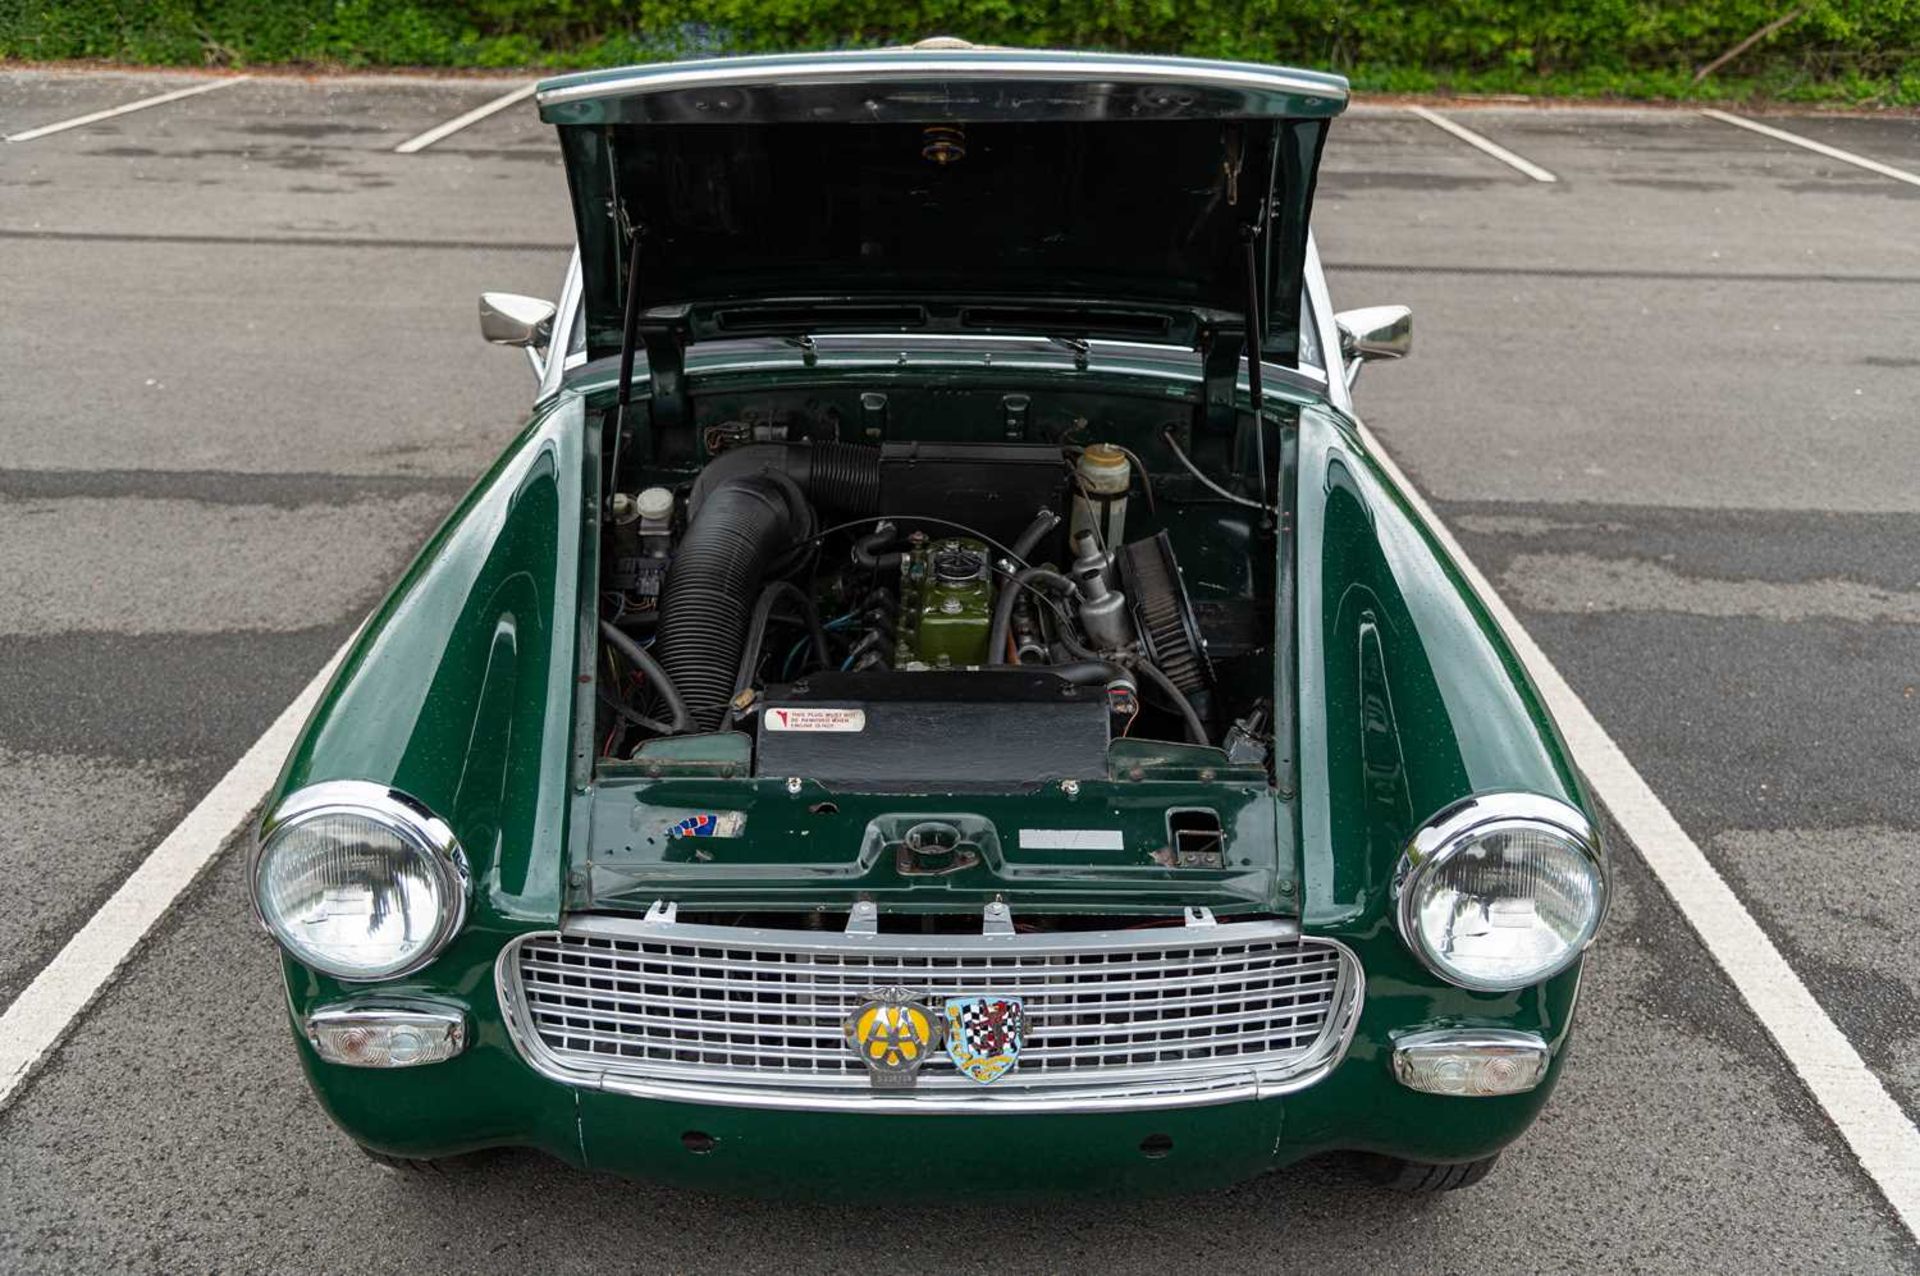 1965 Austin-Healey Sprite Formerly the property of British Formula One racing driver David Piper - Image 70 of 71